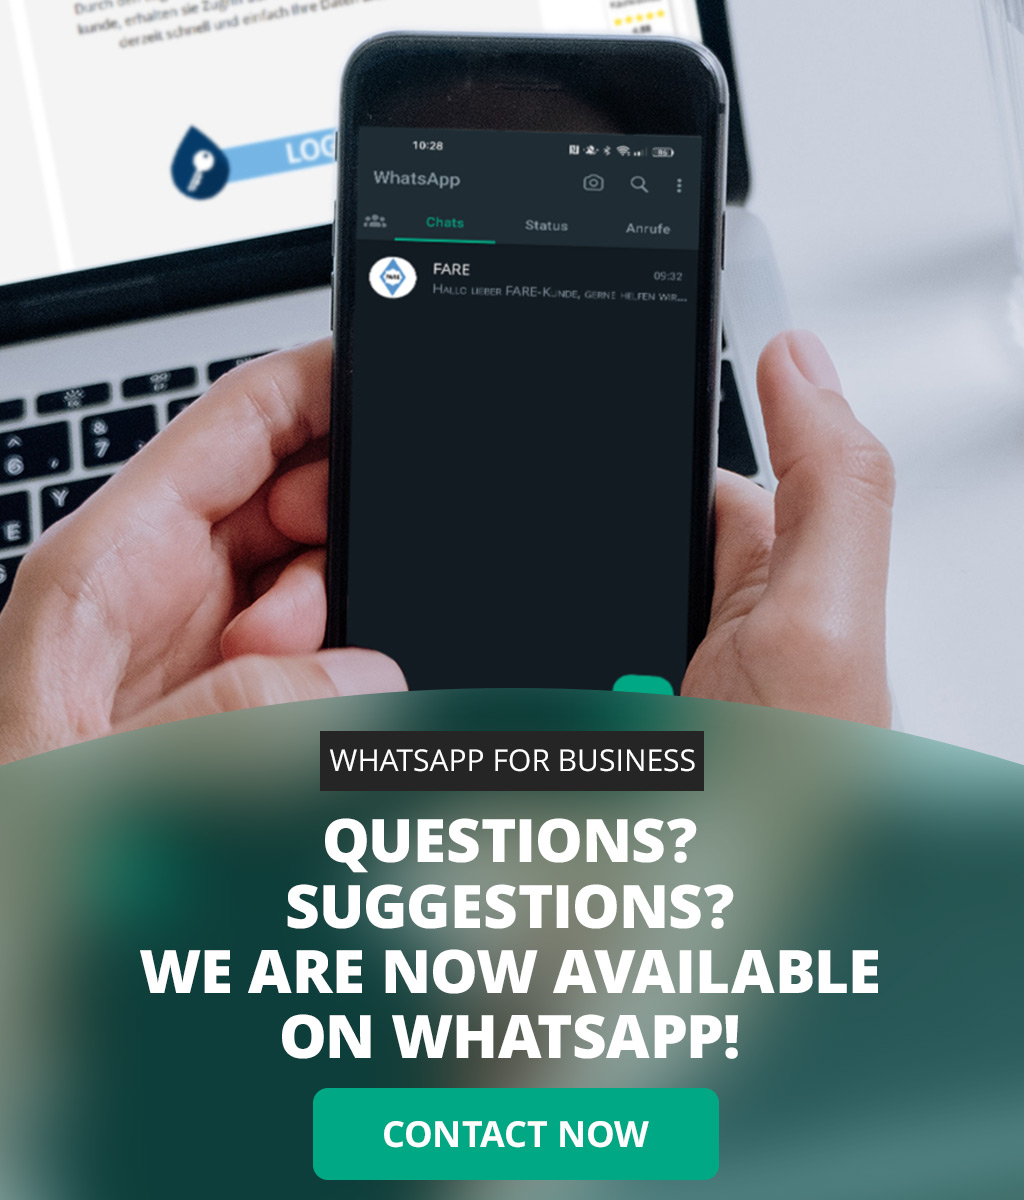 FARE Whats App for Business